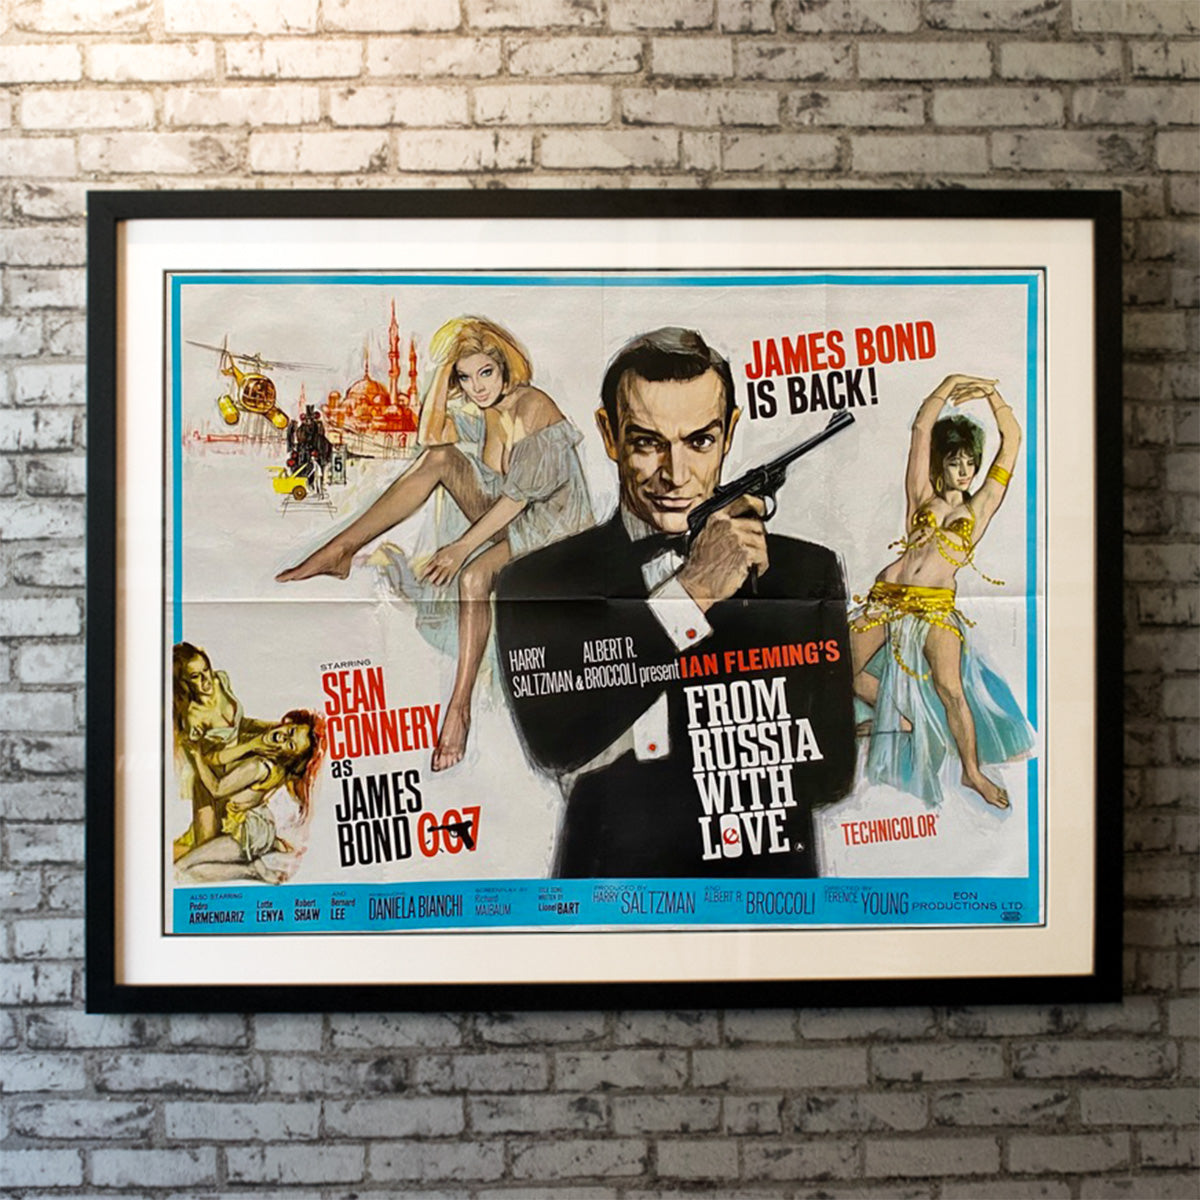 Original Movie Poster of From Russia With Love (1963)